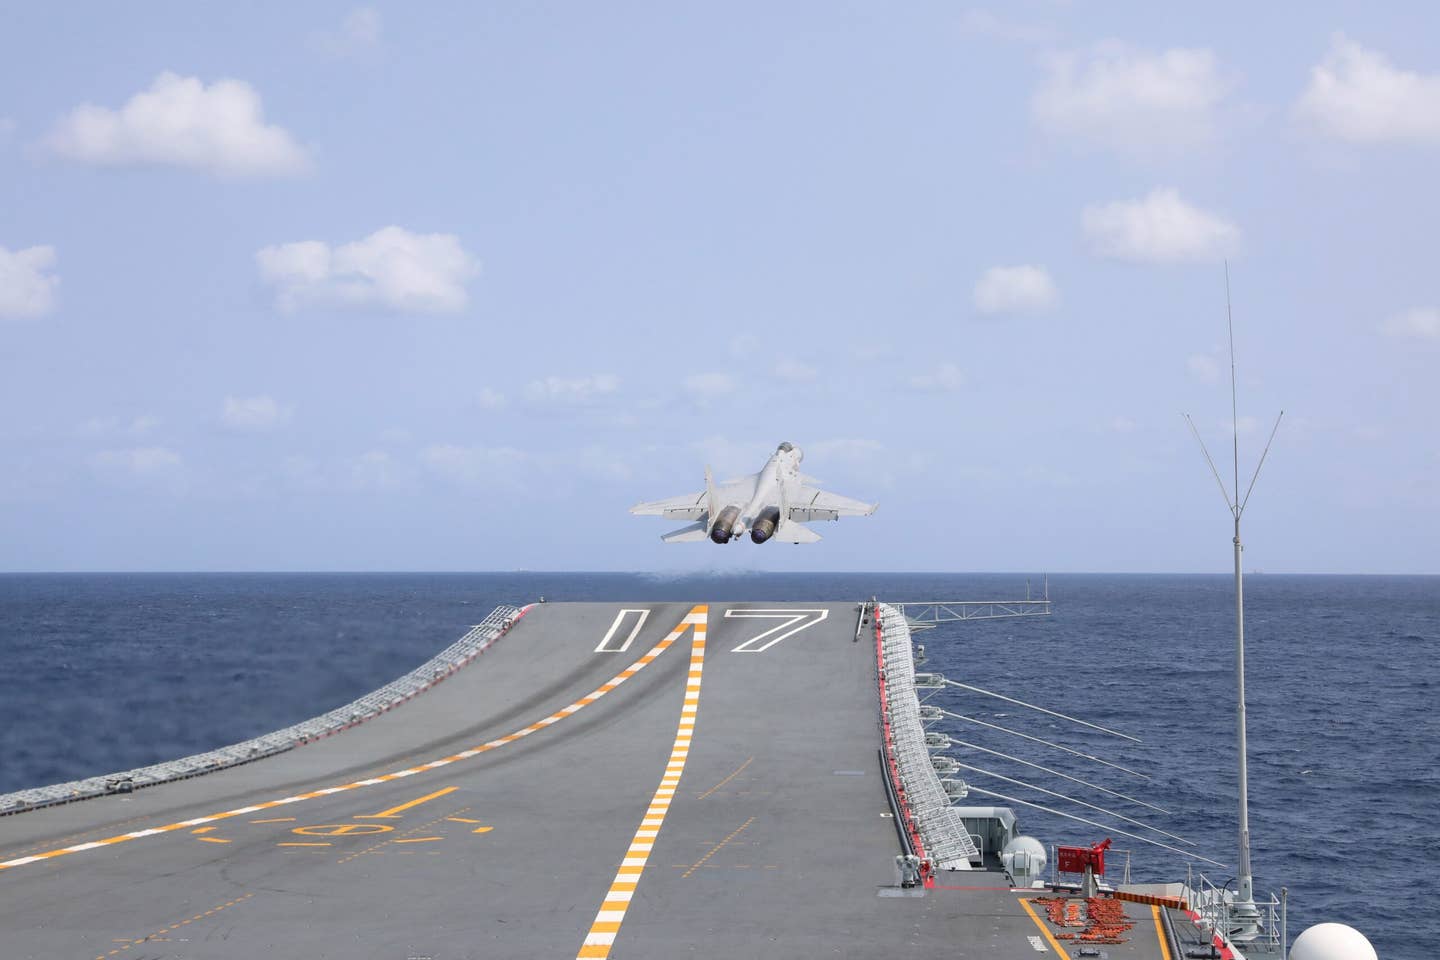 A photo taken on April 9, 2023, shows a J-15 fighter taking off from the ski jump on the carrier <em>Shandong</em> during a combat readiness patrol and military exercises around Taiwan. <em>Photo by An Ni/Xinhua via Getty Images</em>